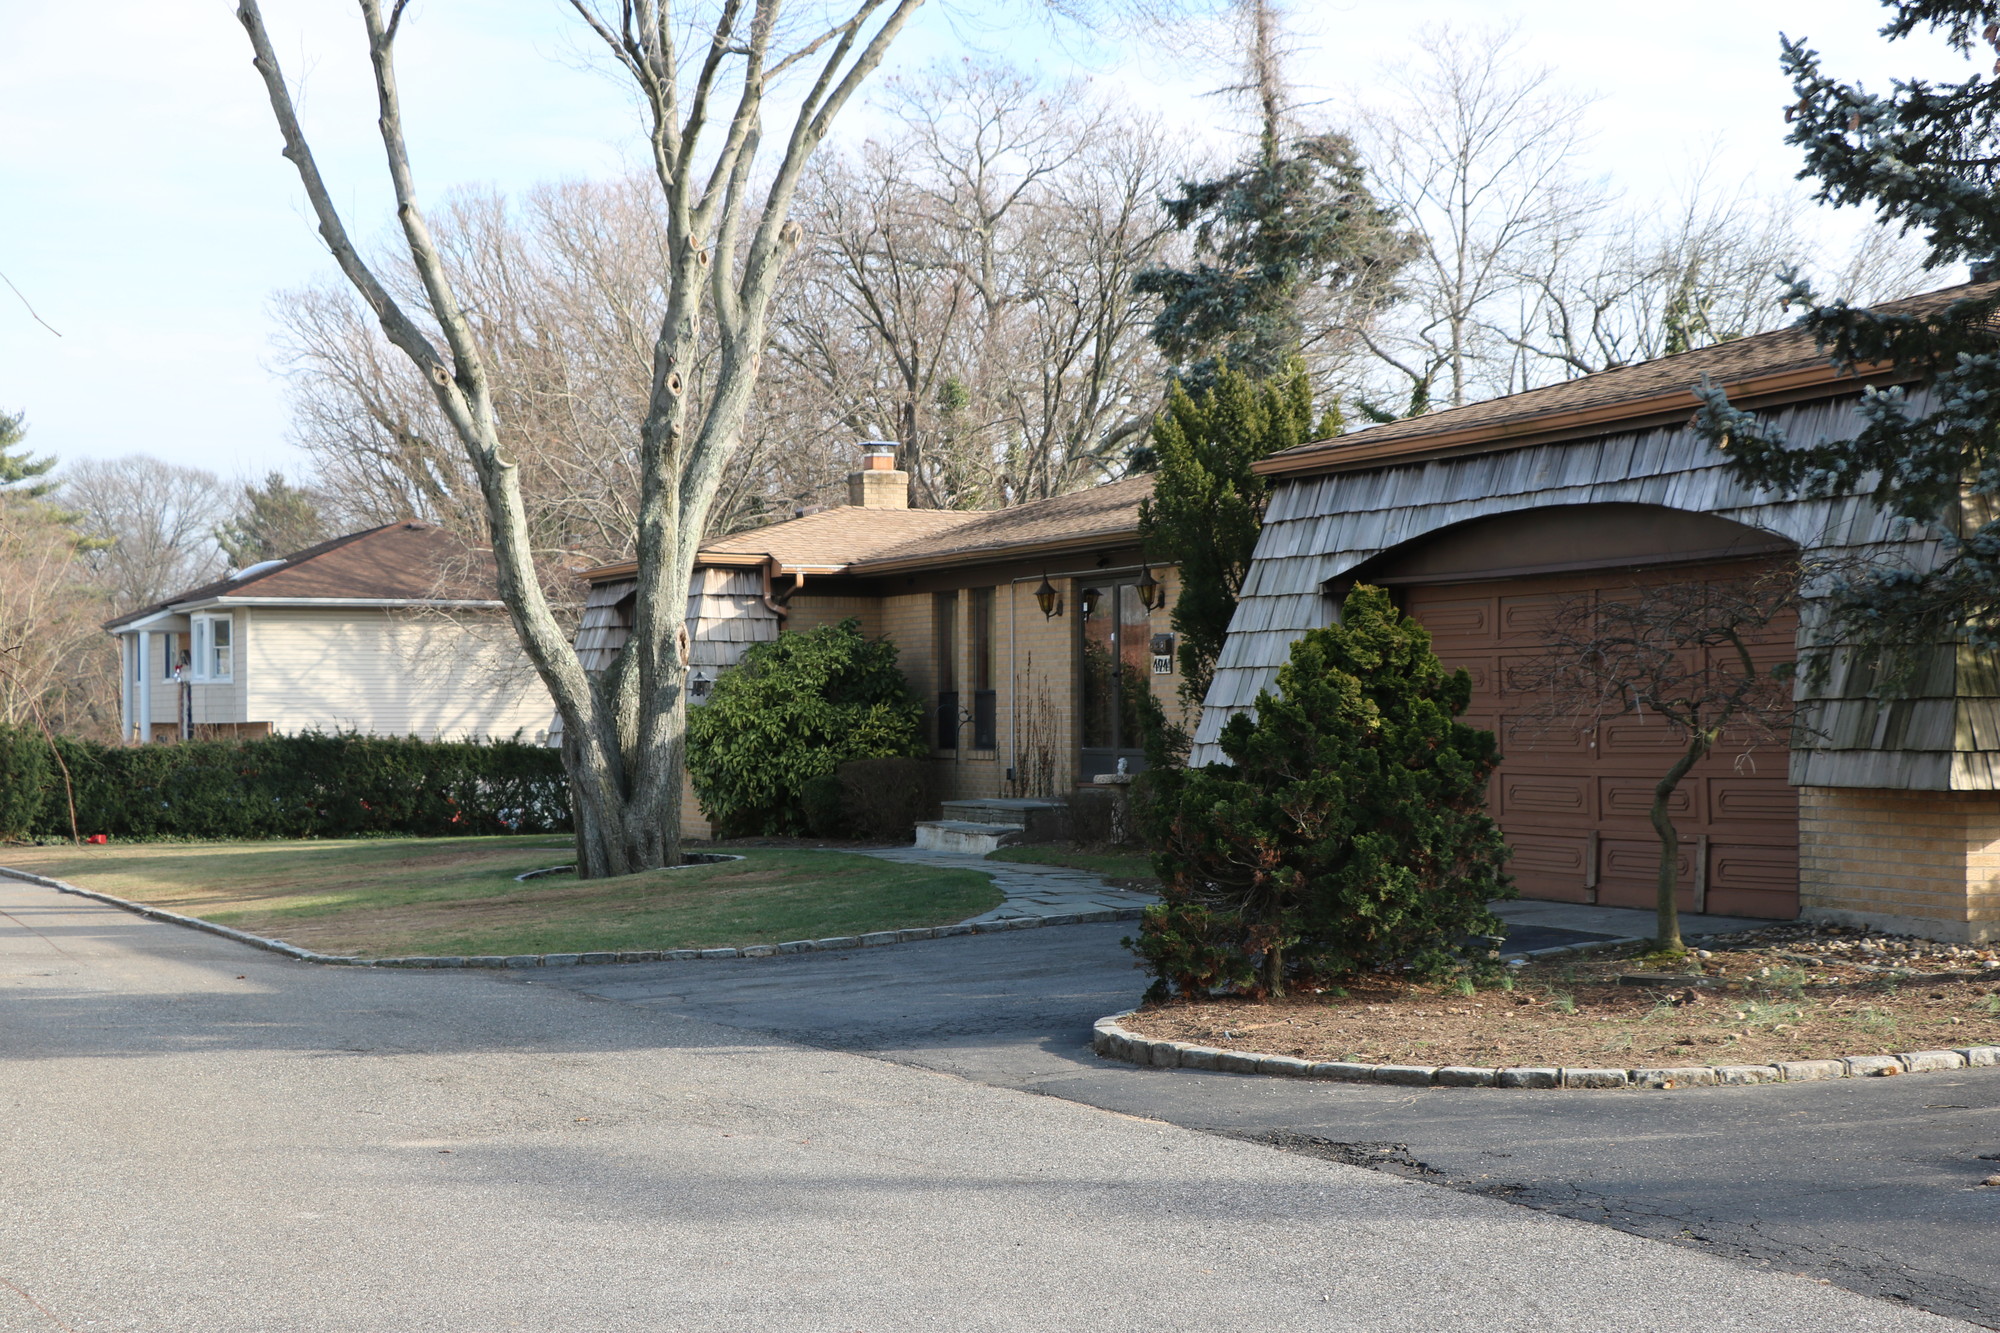 A company seeks to place 12 condominiums on land currently occupied by these two homes on Hempstead Avenue in Malverne Oaks, which is outside the village’s borders.